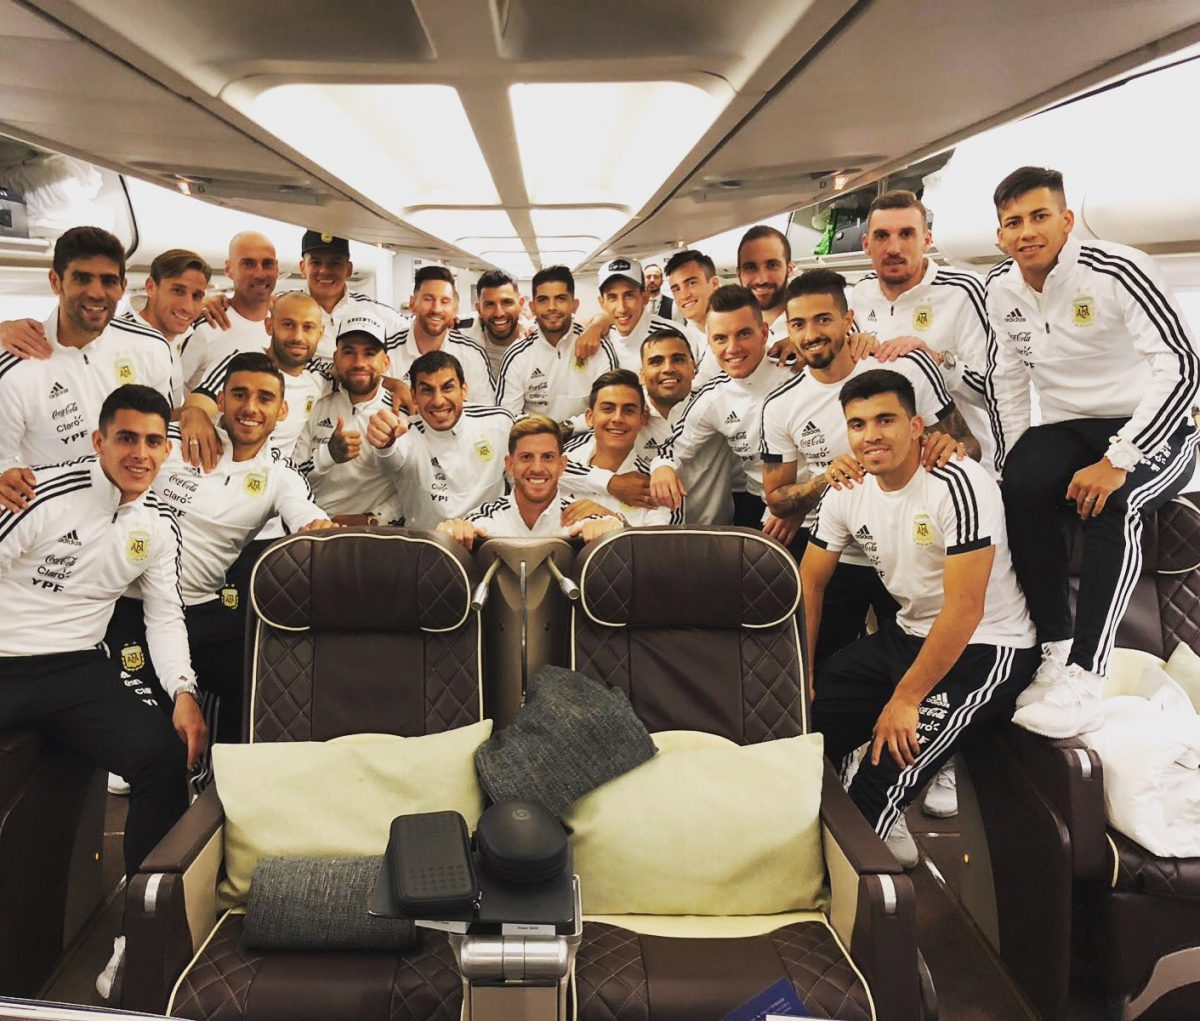 Argentina Land In Barcelona For Final World Cup Preparation